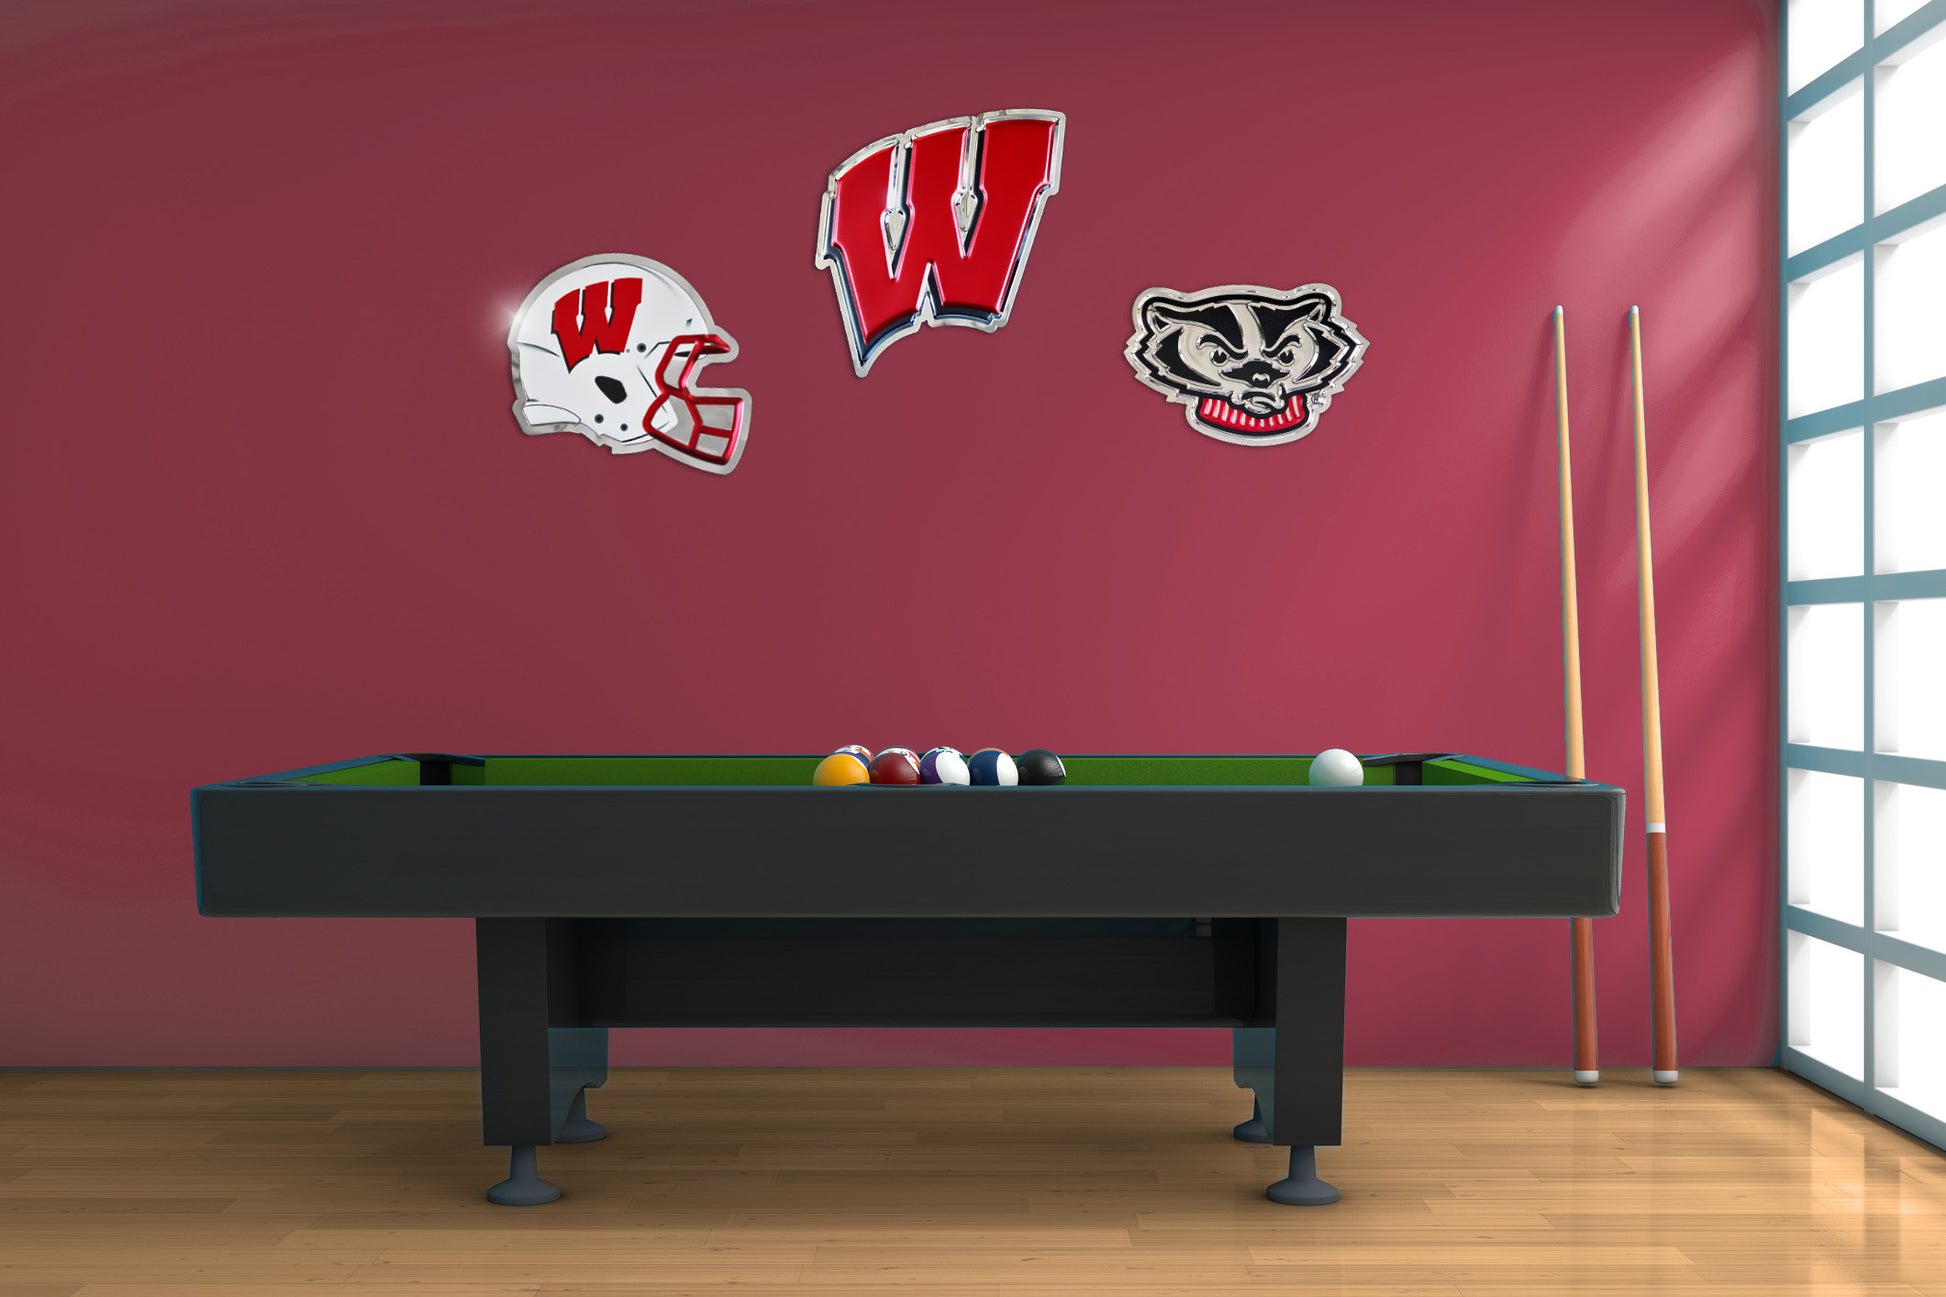 embossed mirror polished stainless steel sign garage décor Wisconsin Badgers Football Helmet on wall